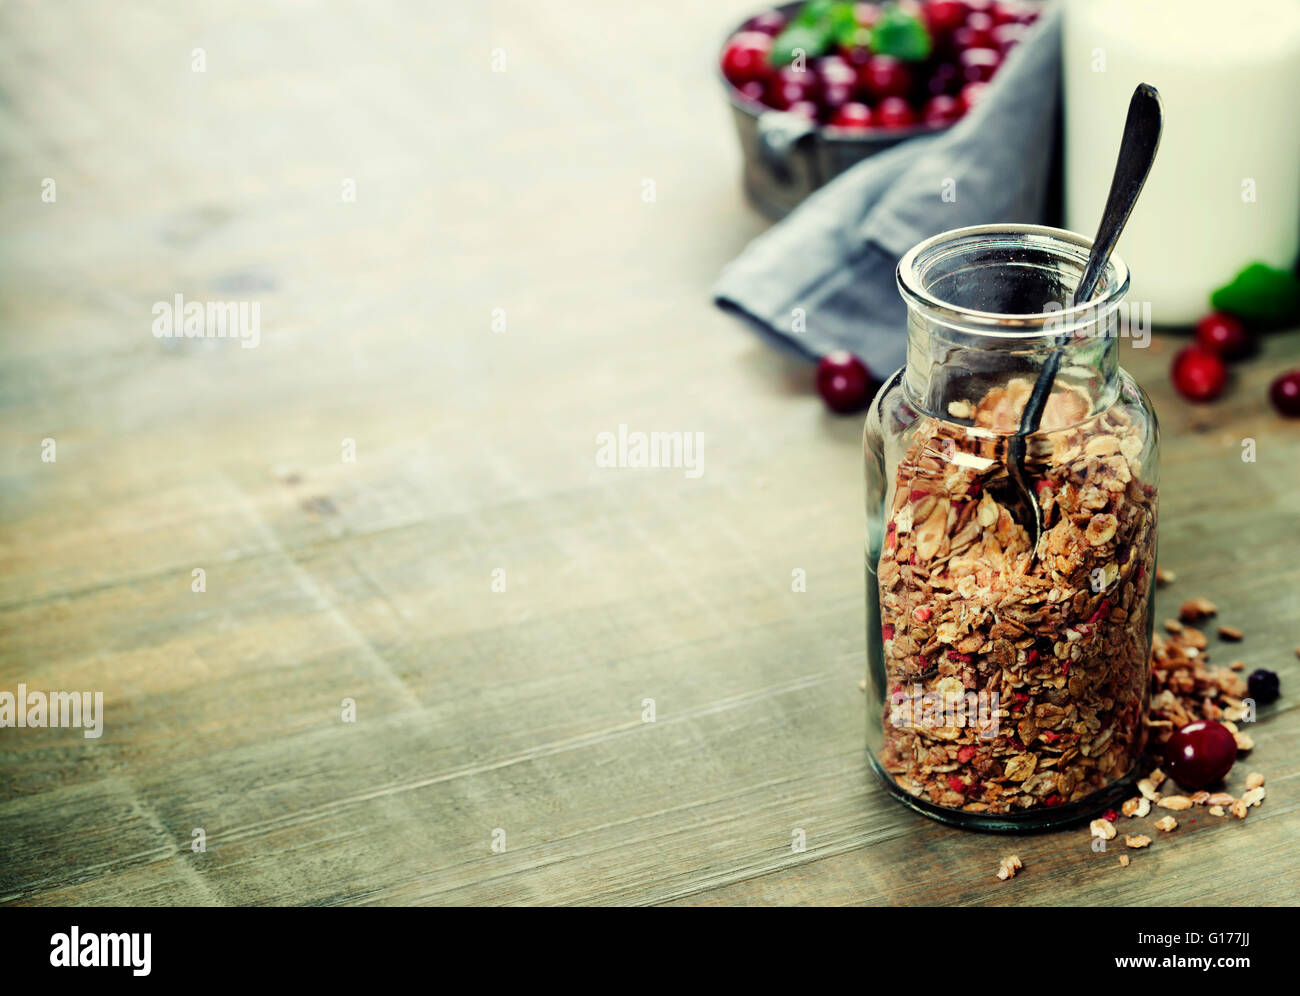 Close up of jar with granola or muesli on table - Healthy eating, Detox or Diet concept Stock Photo